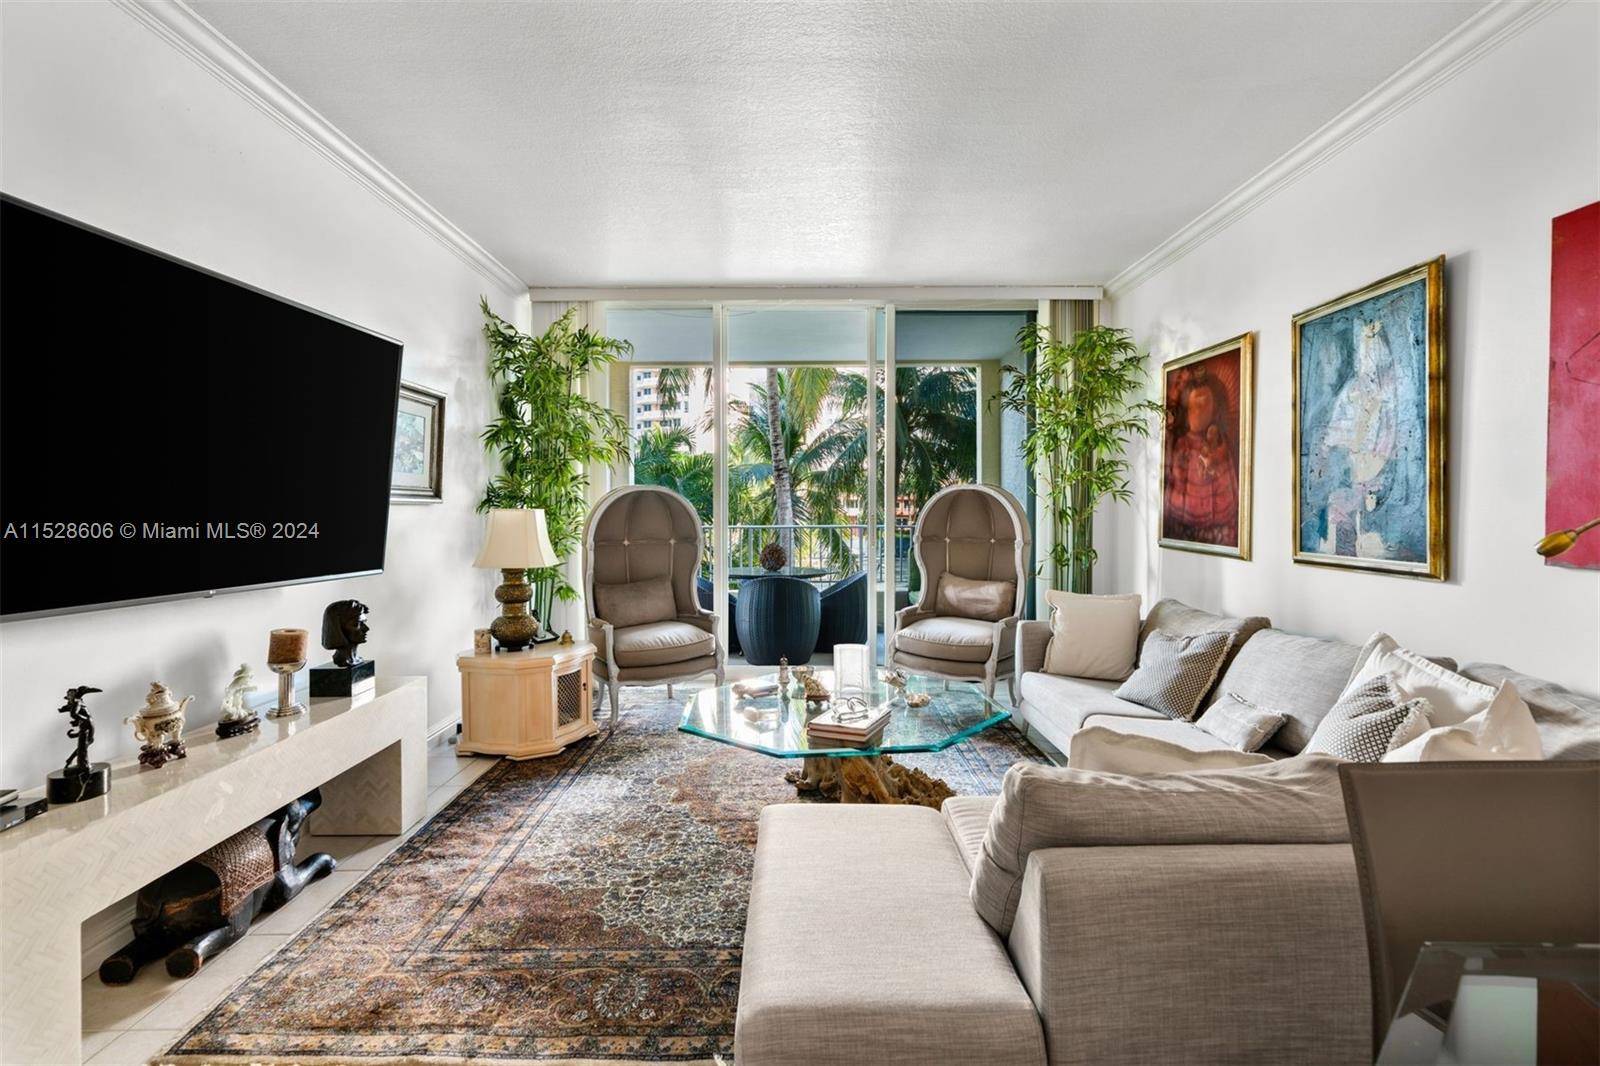 Discover this spacious and bright two bedroom in the heart of Key Biscayne.